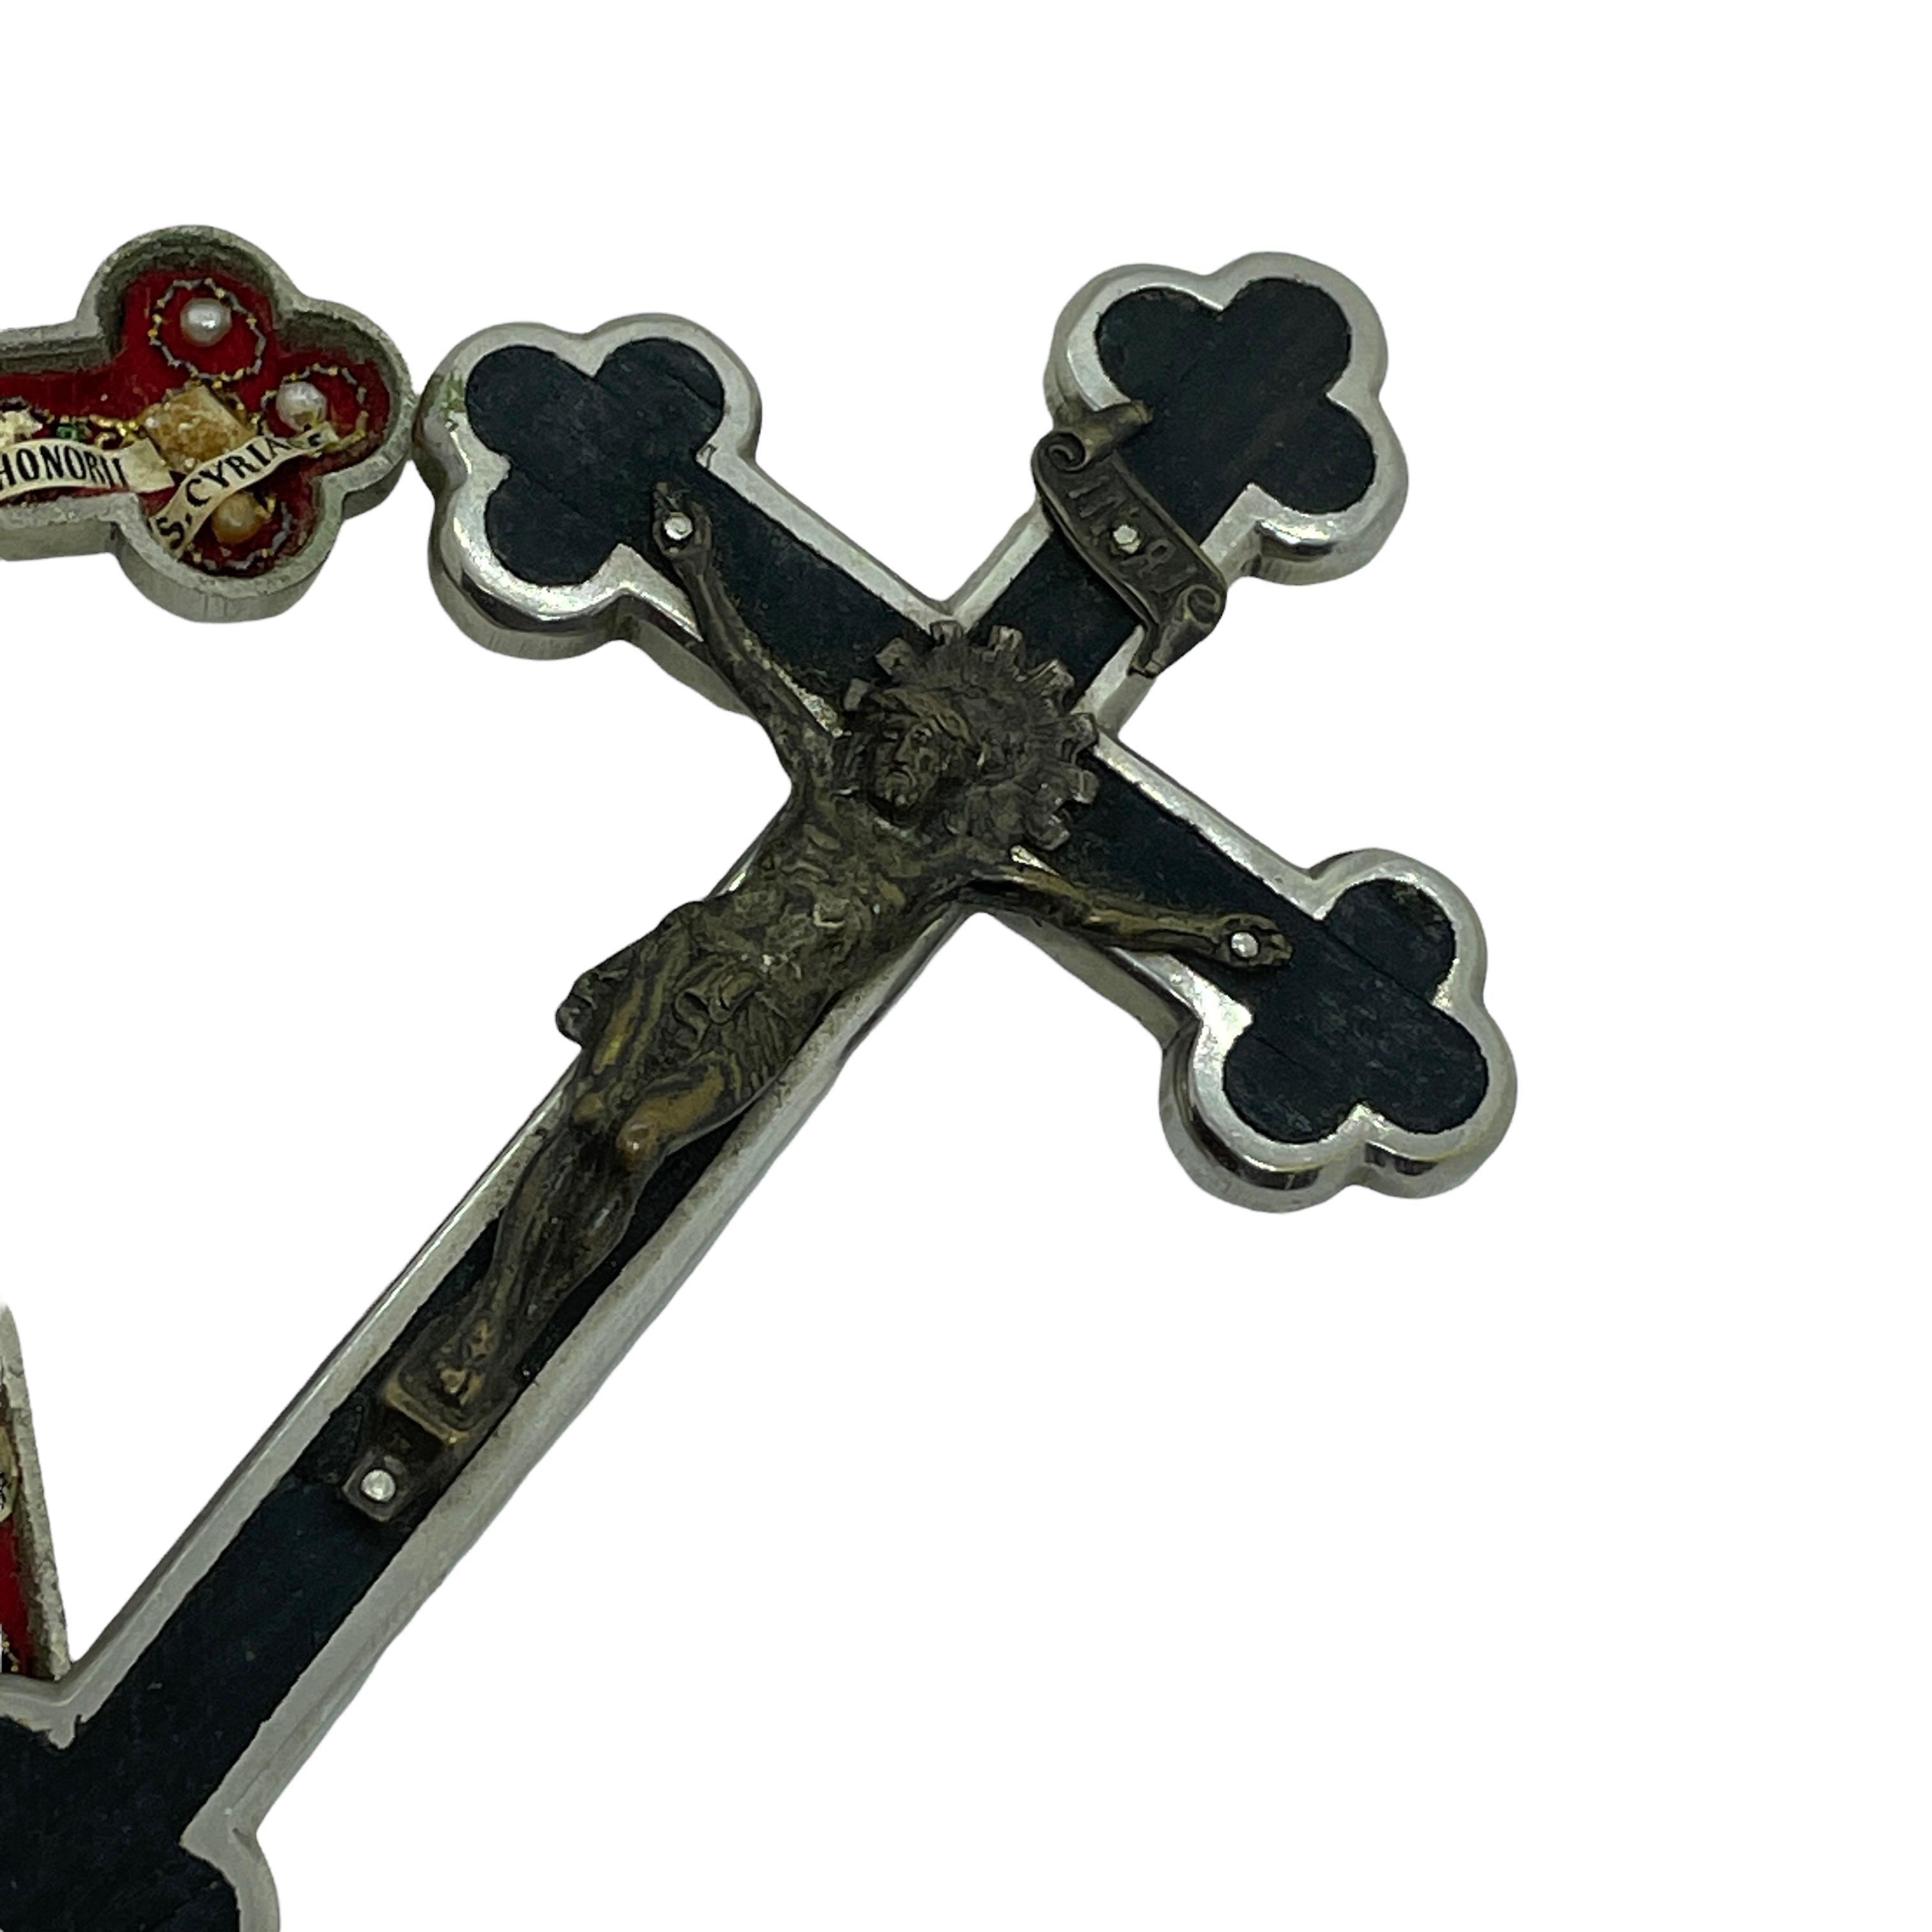 Hand-Crafted Antique Catholic Reliquary Box Crucifix Pendant with 12 Relics of Saints